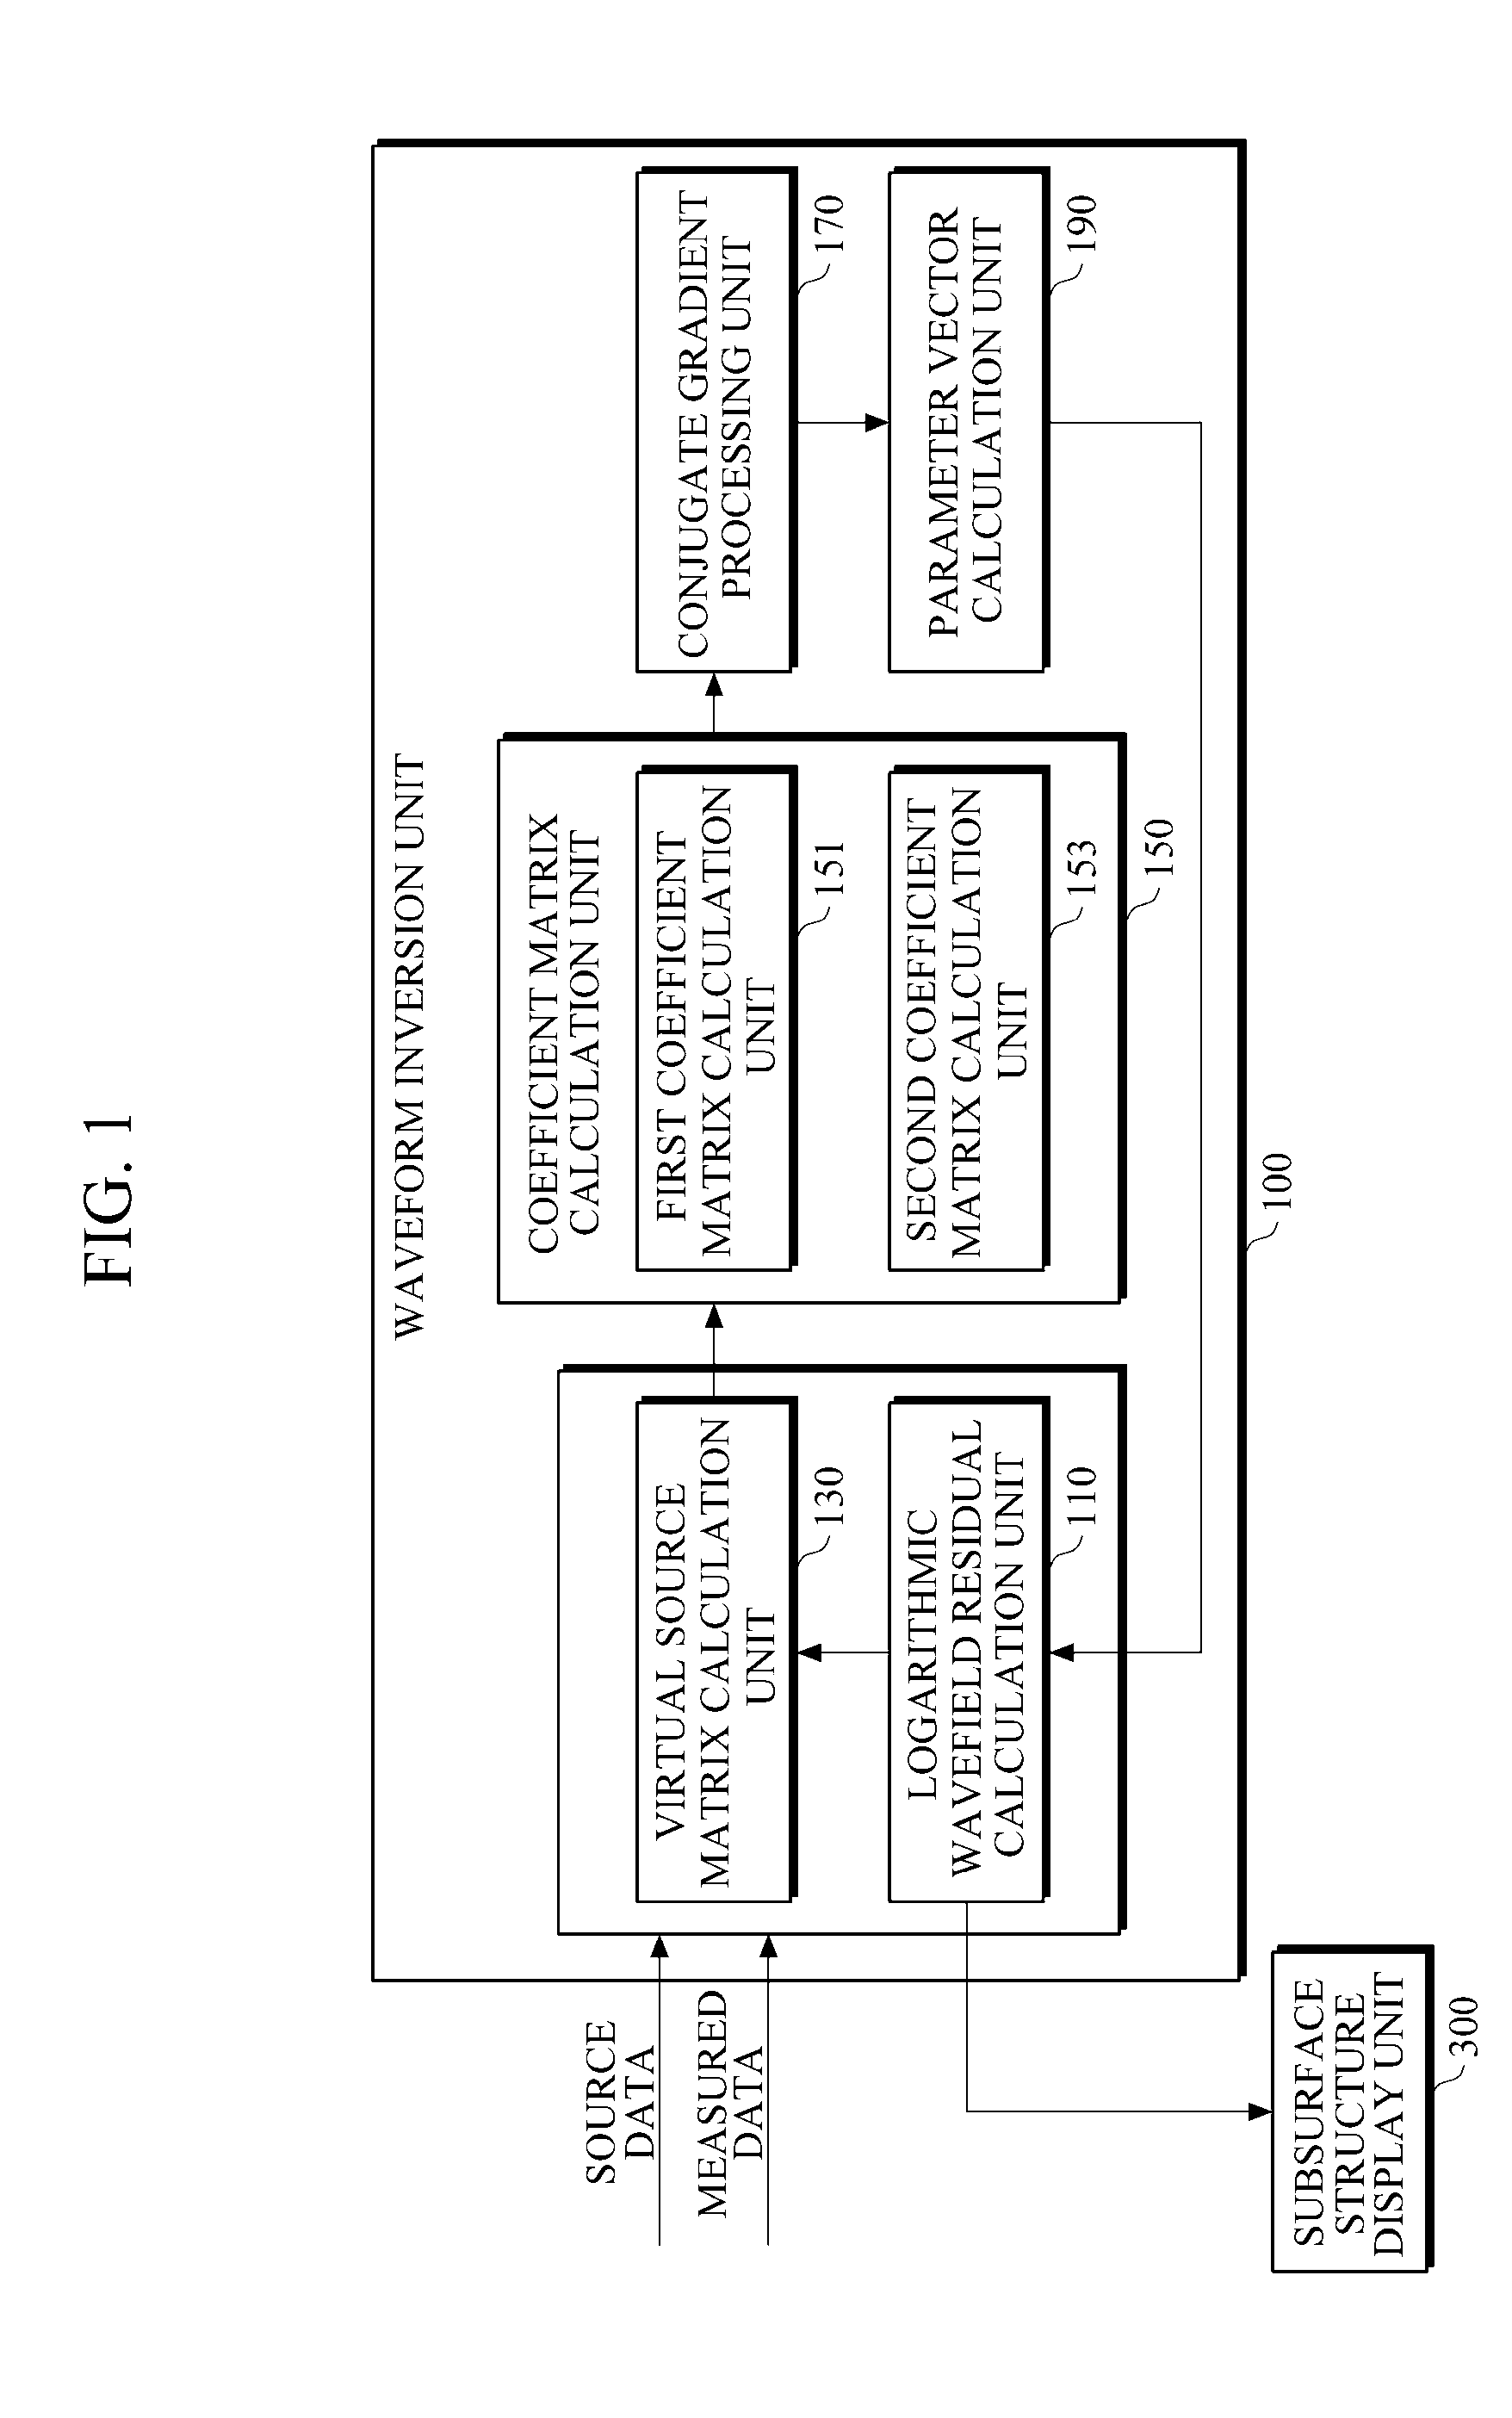 Apparatus and method for seismic imaging using waveform inversion solved by conjugate gradient least squares method